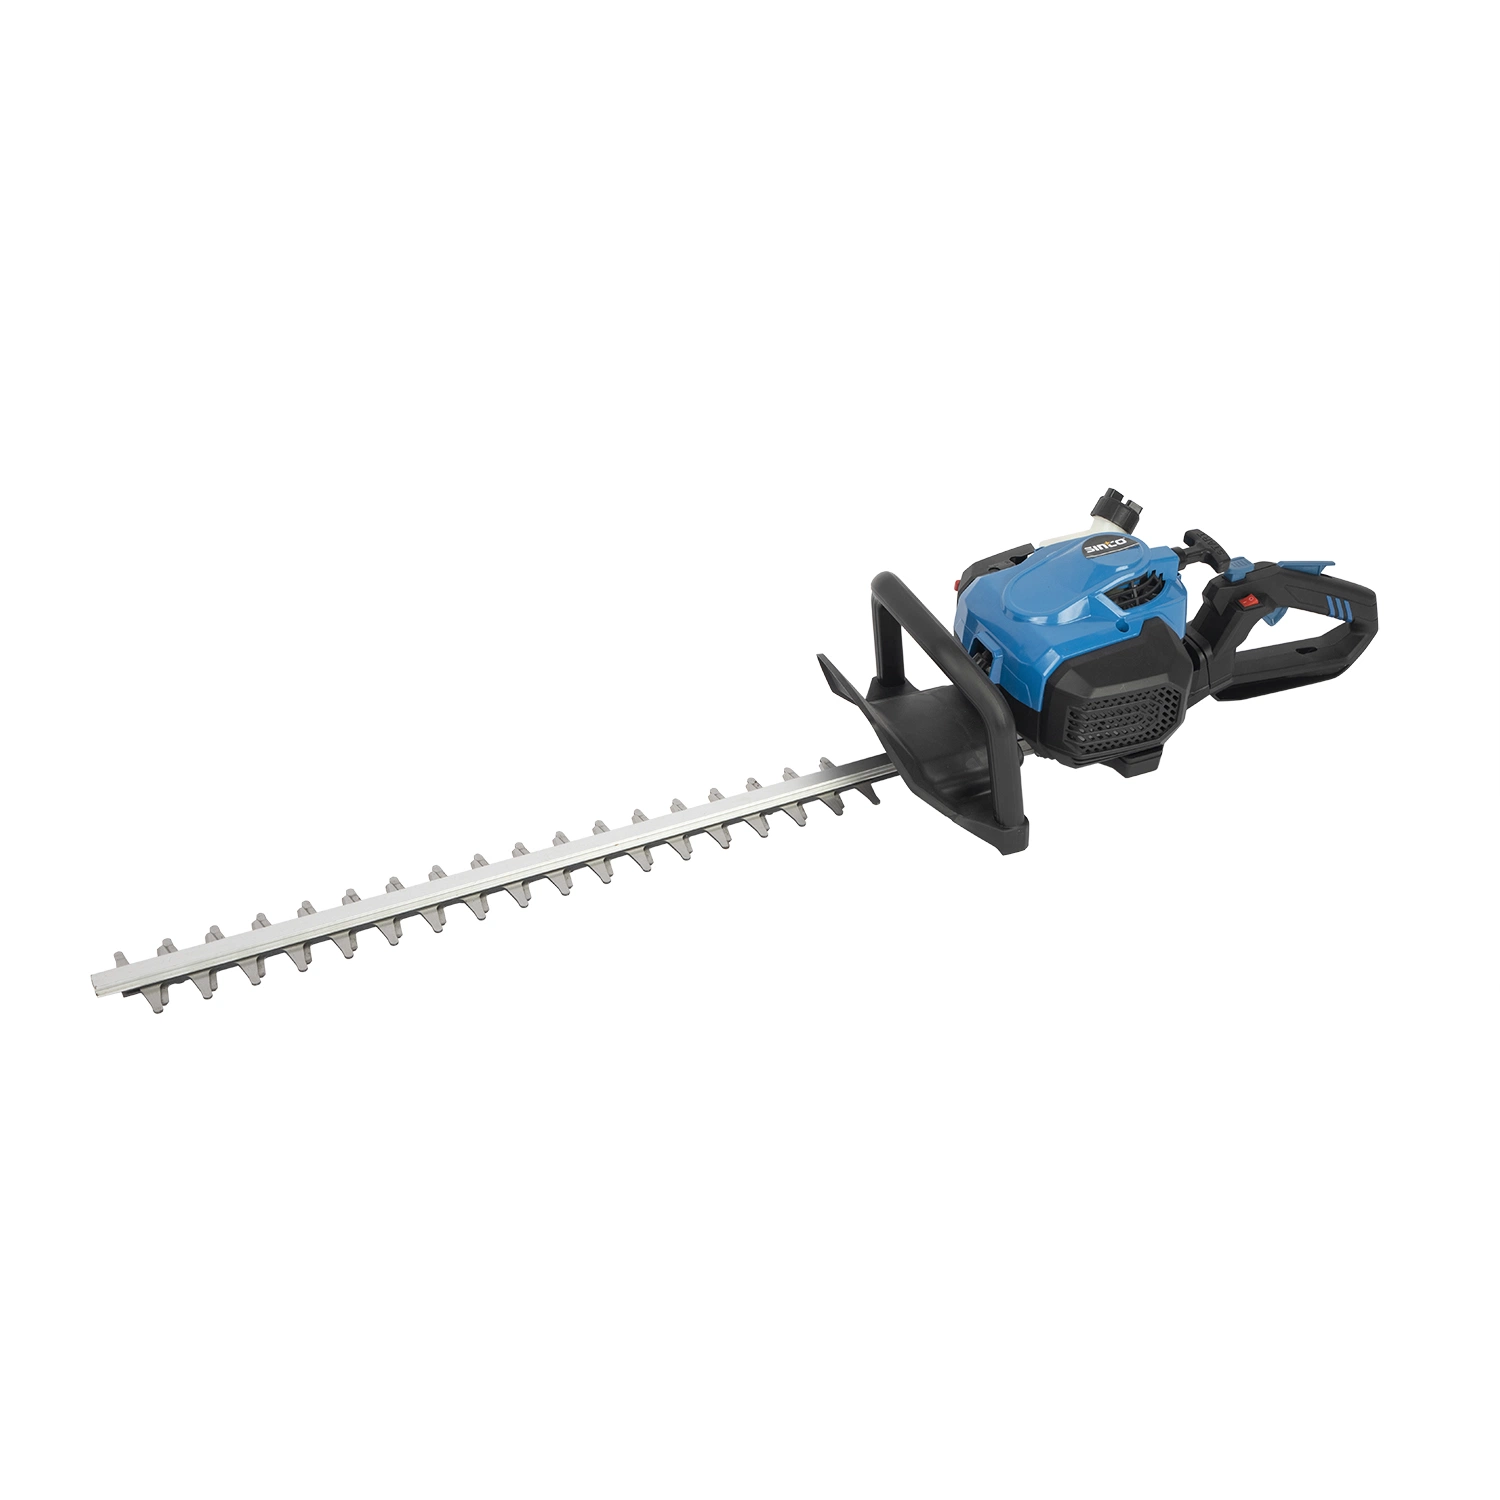 Hot Selling Multifunction Trimmer Pole Hedge Trimmer 20 Inch Bush Lawn Garden Cutter Electric Garden Power Tool Battery 25.4cc 52cc Hedge Trimmer